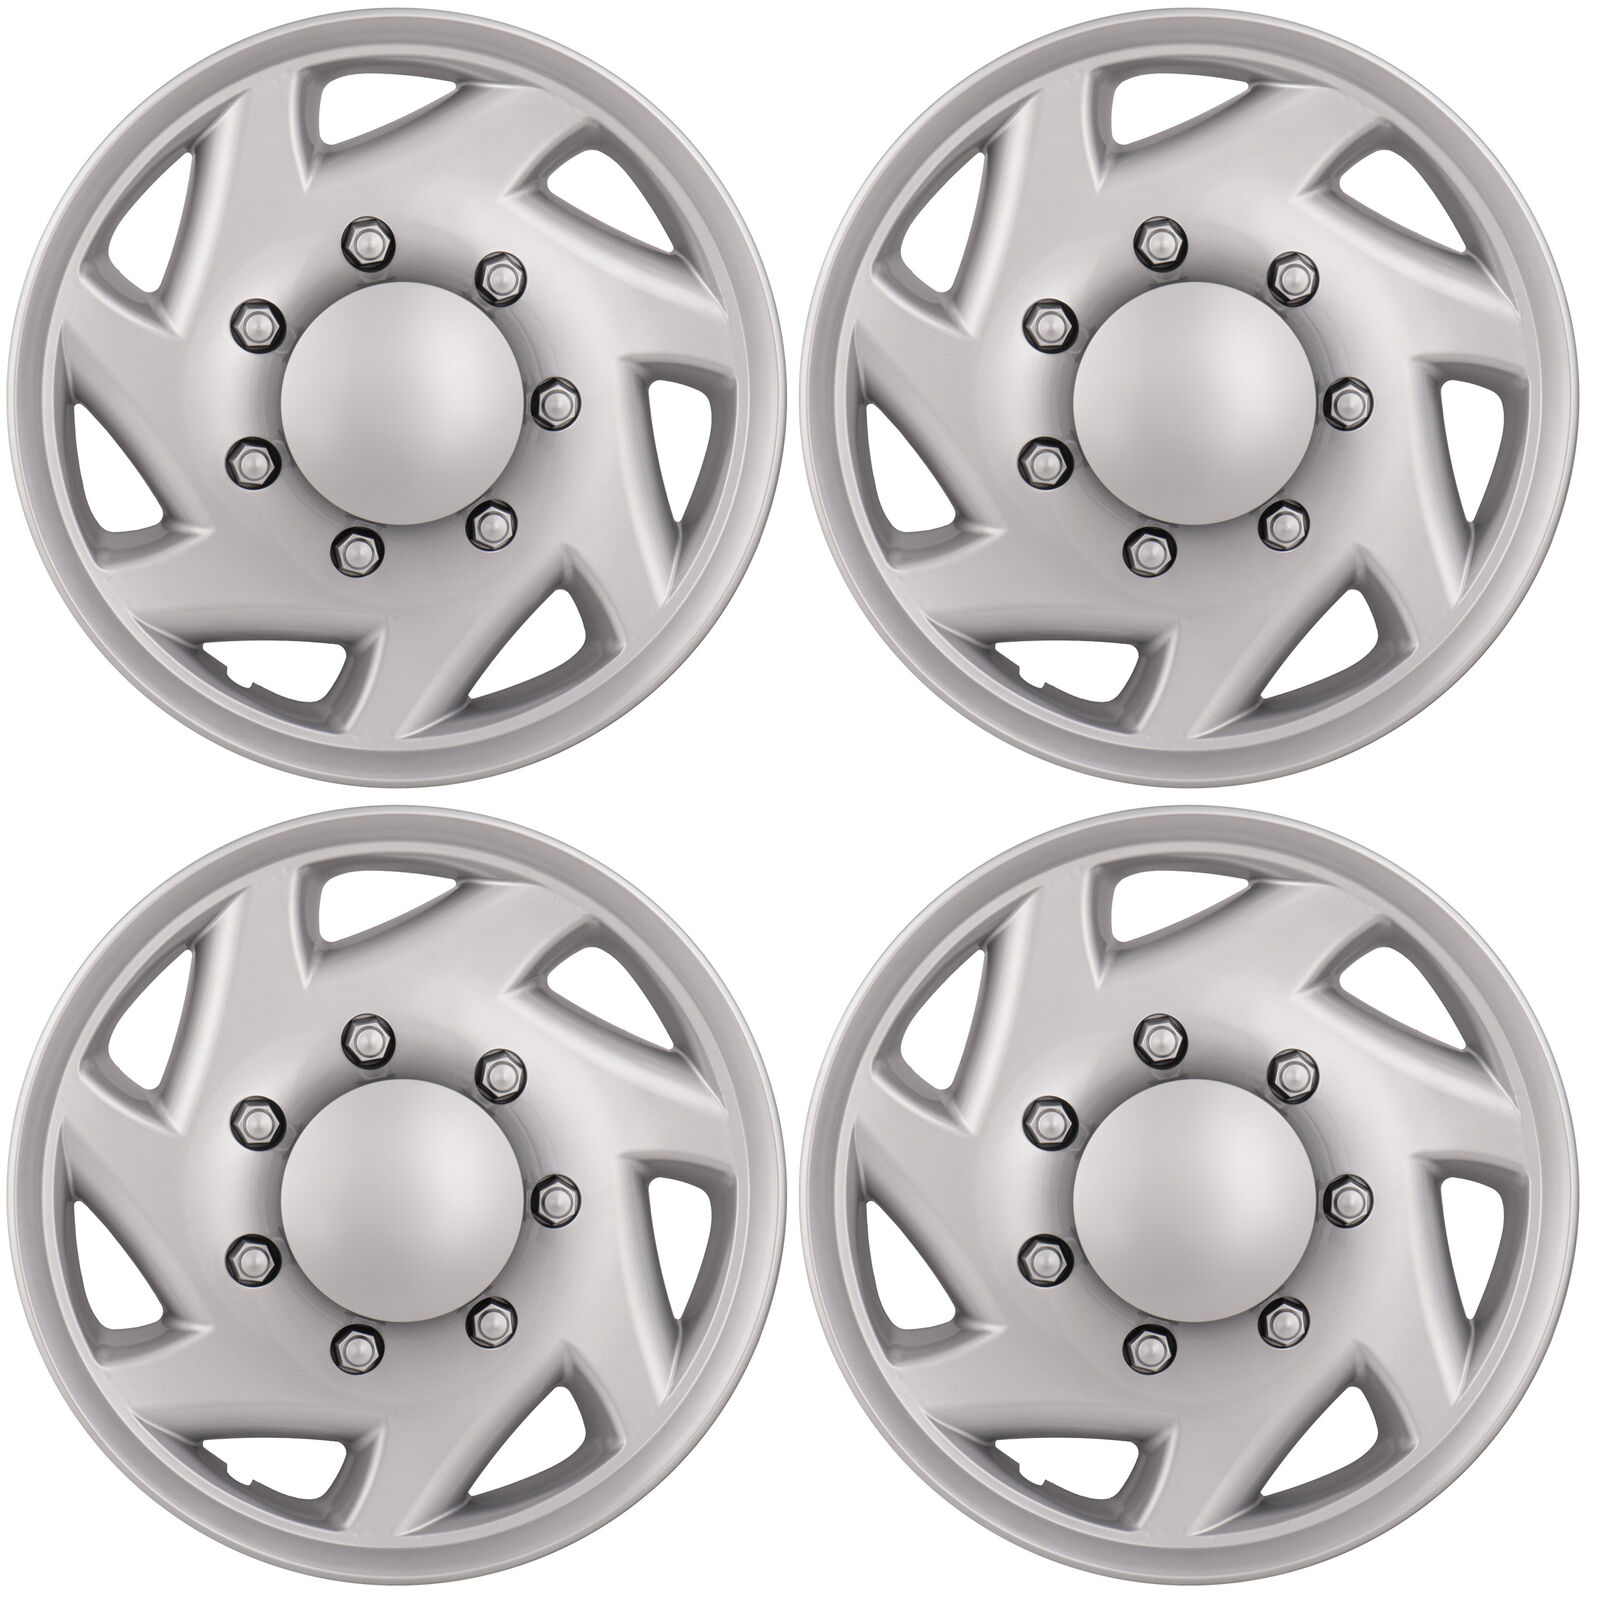 NEW Hubcap for Ford Van 1998-2023, Premium 16-inch Heavy Duty Snap-On (Set of 4)